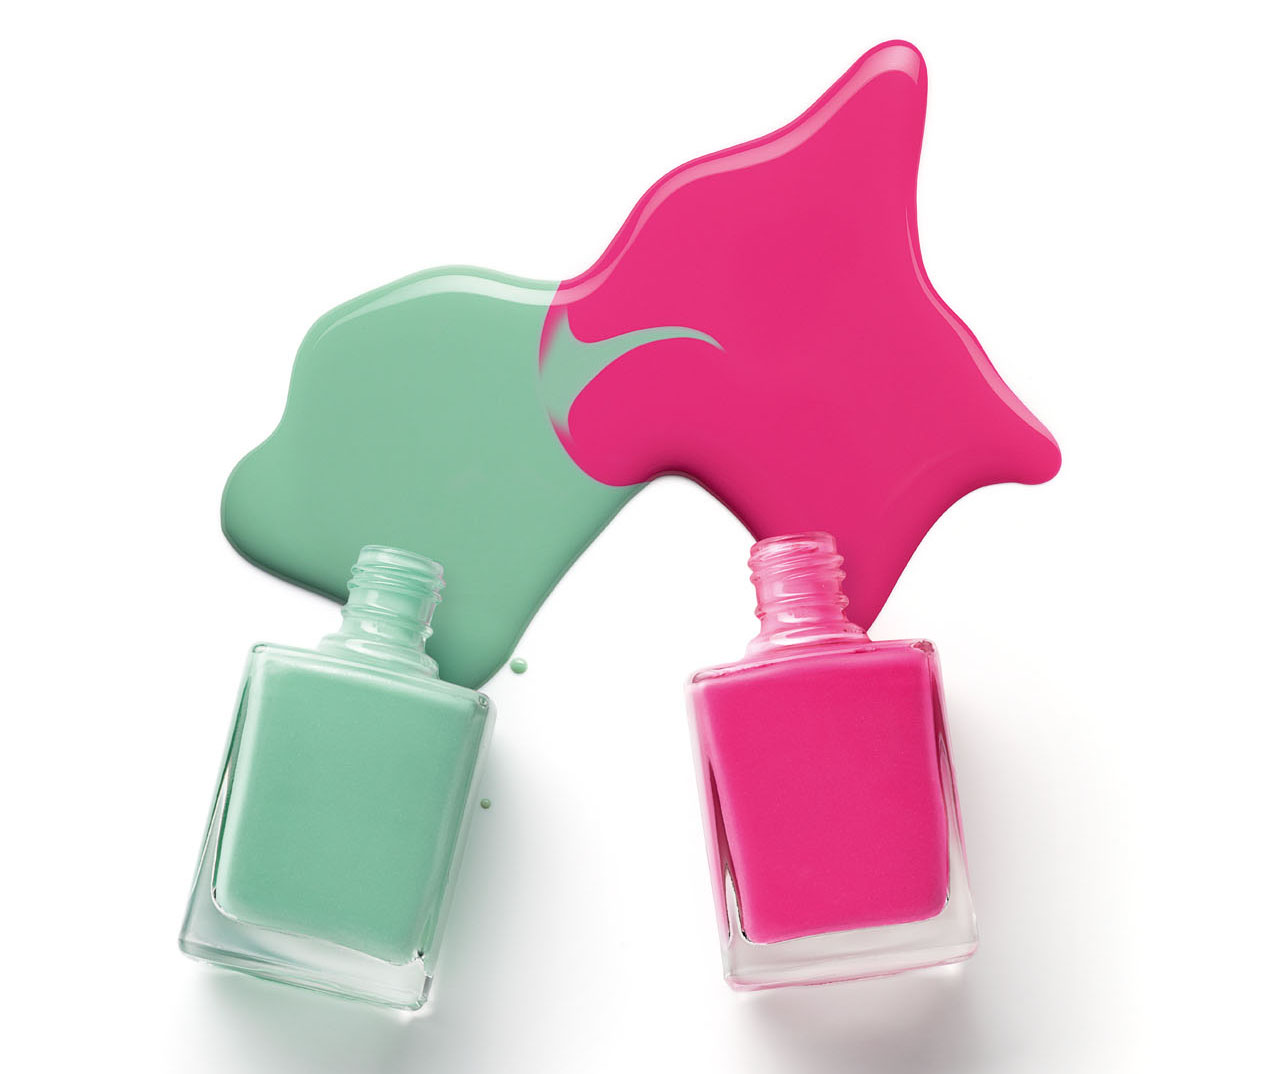 Clipart of the Dripping Nail Polish Bottles free image.